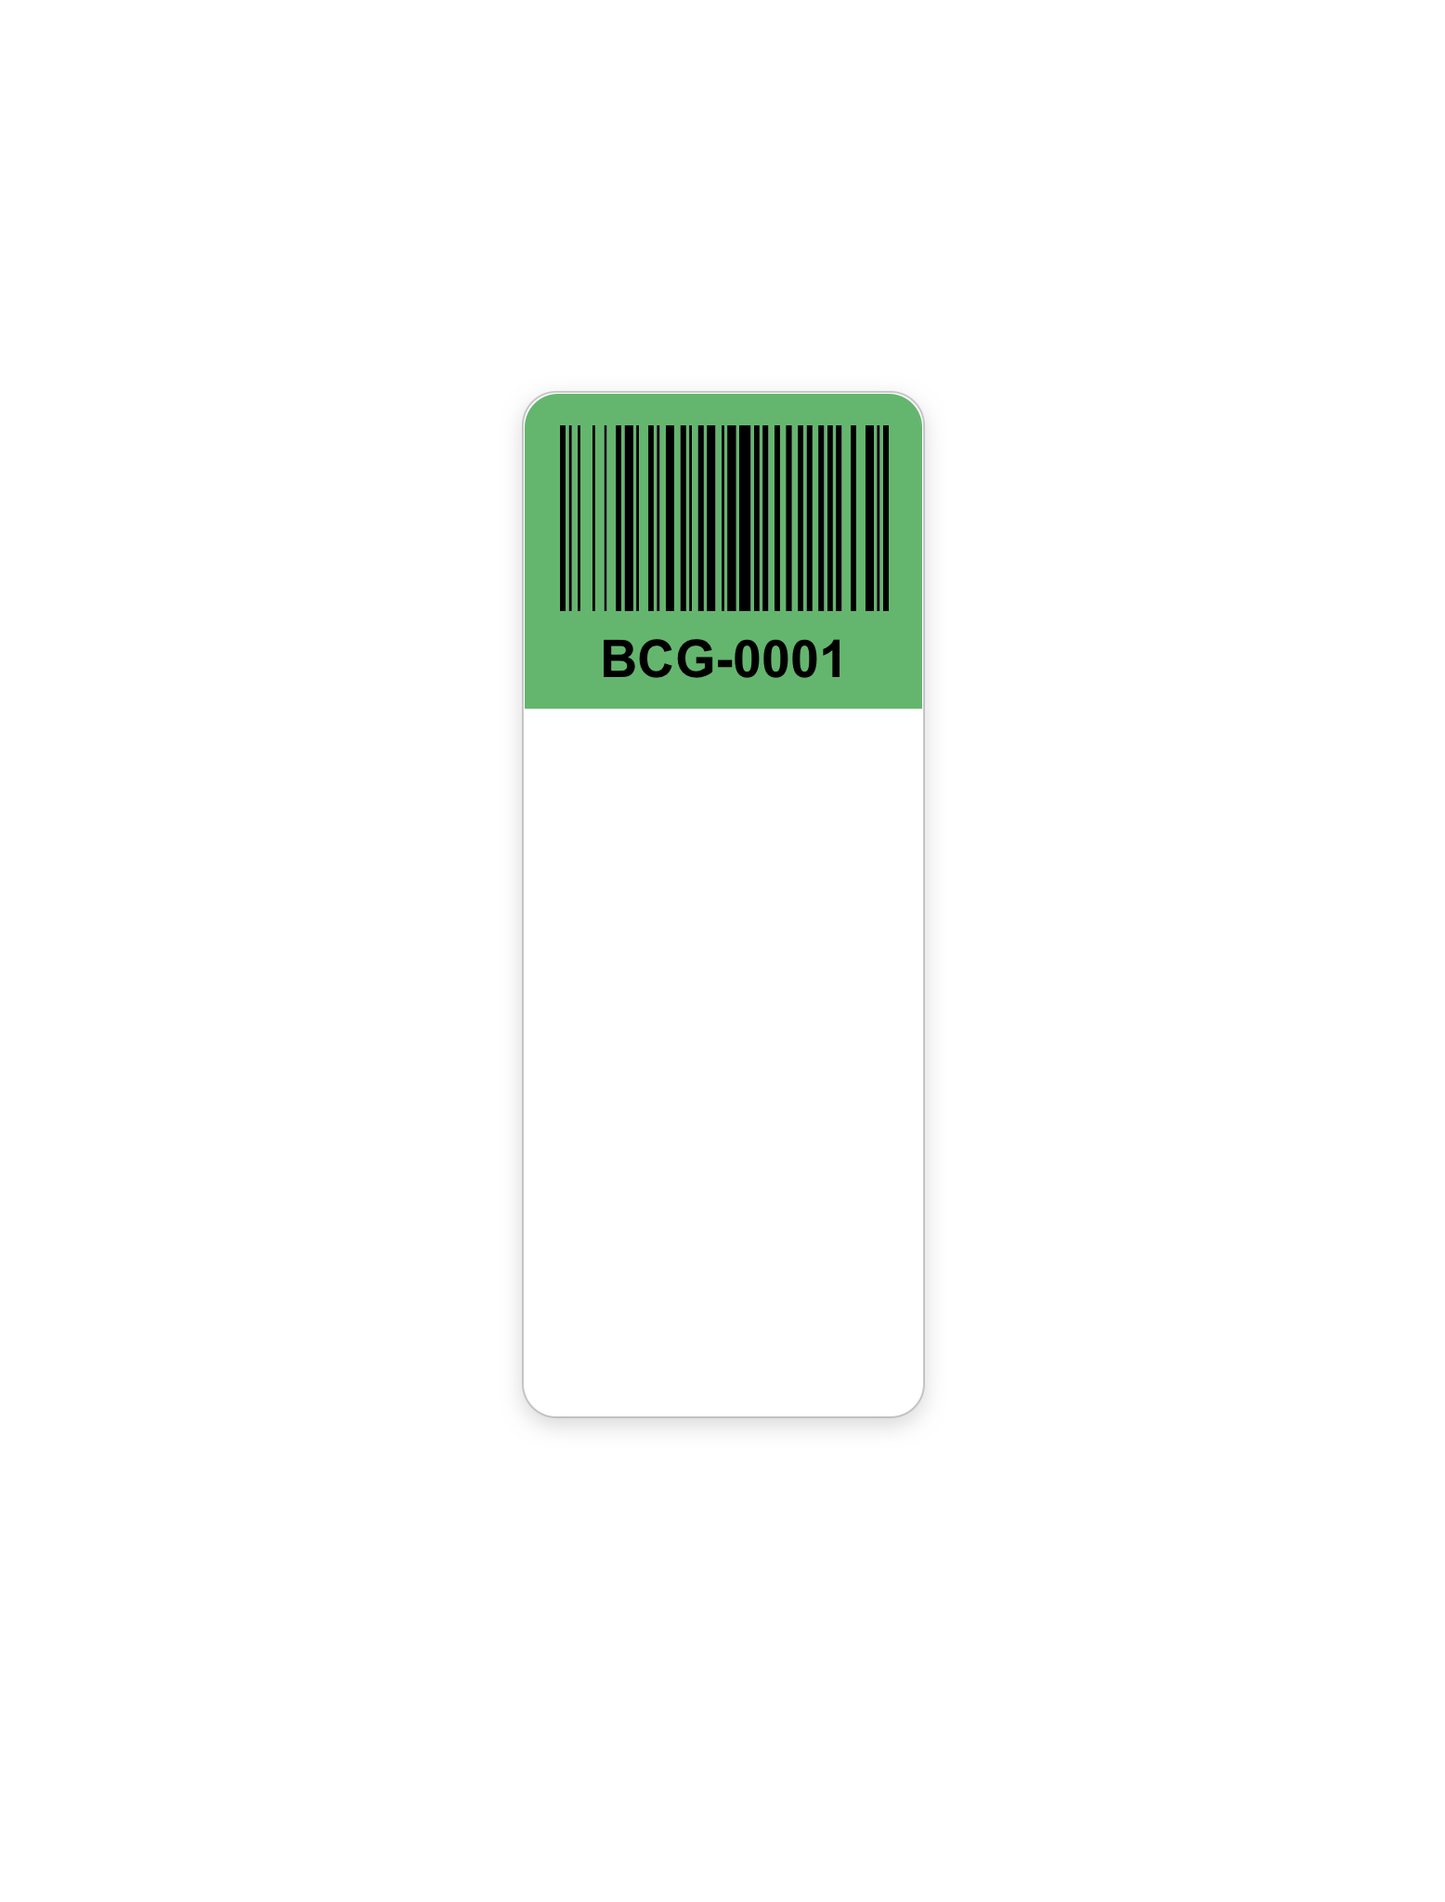 120 Cable Labels for bulk items